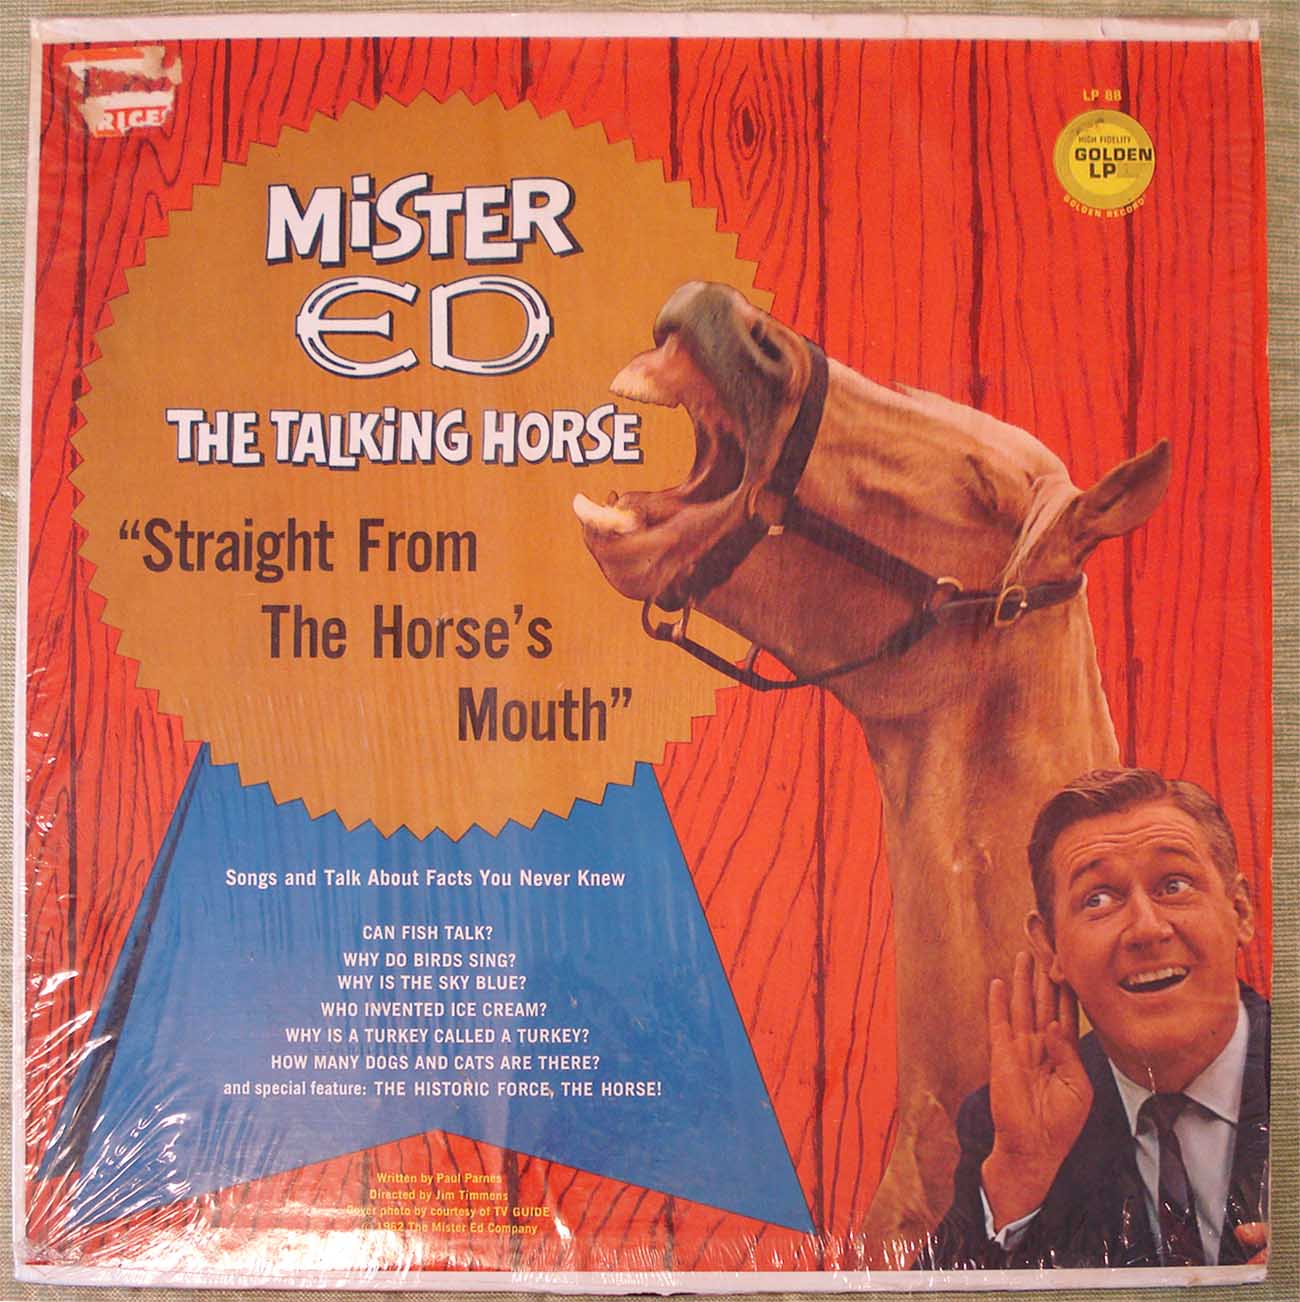 Mister Ed The Talking Horse - Straight From The Horse's Mouth (1962) Vinyl LP 33rpm LP88